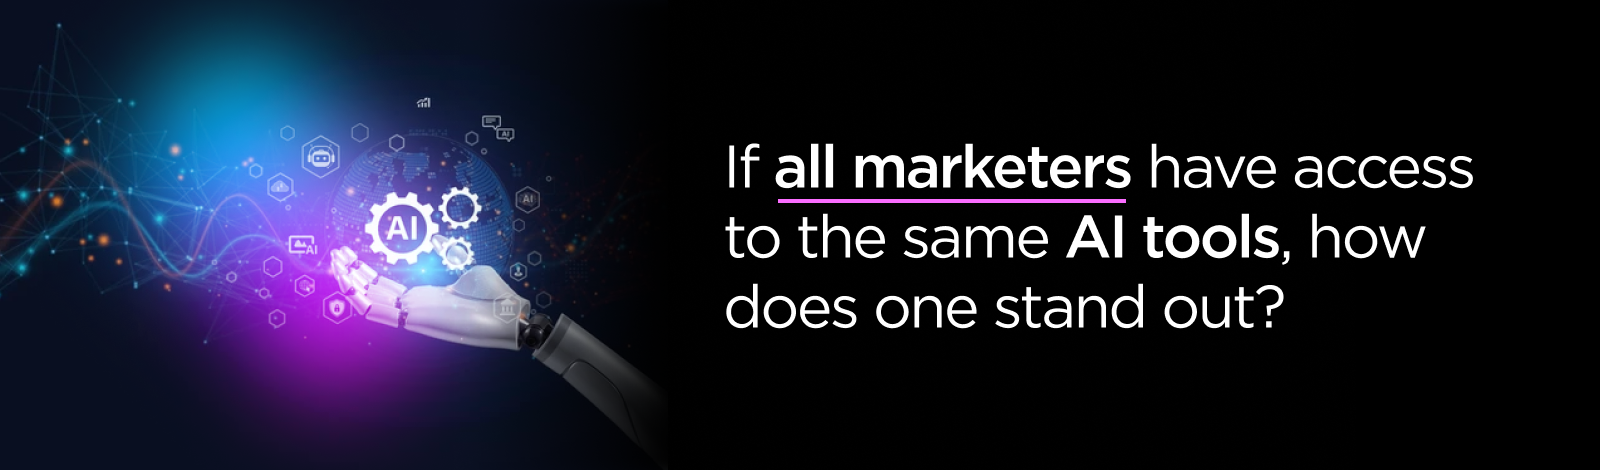 If all marketers have access to the same AI tools, how does one stand out